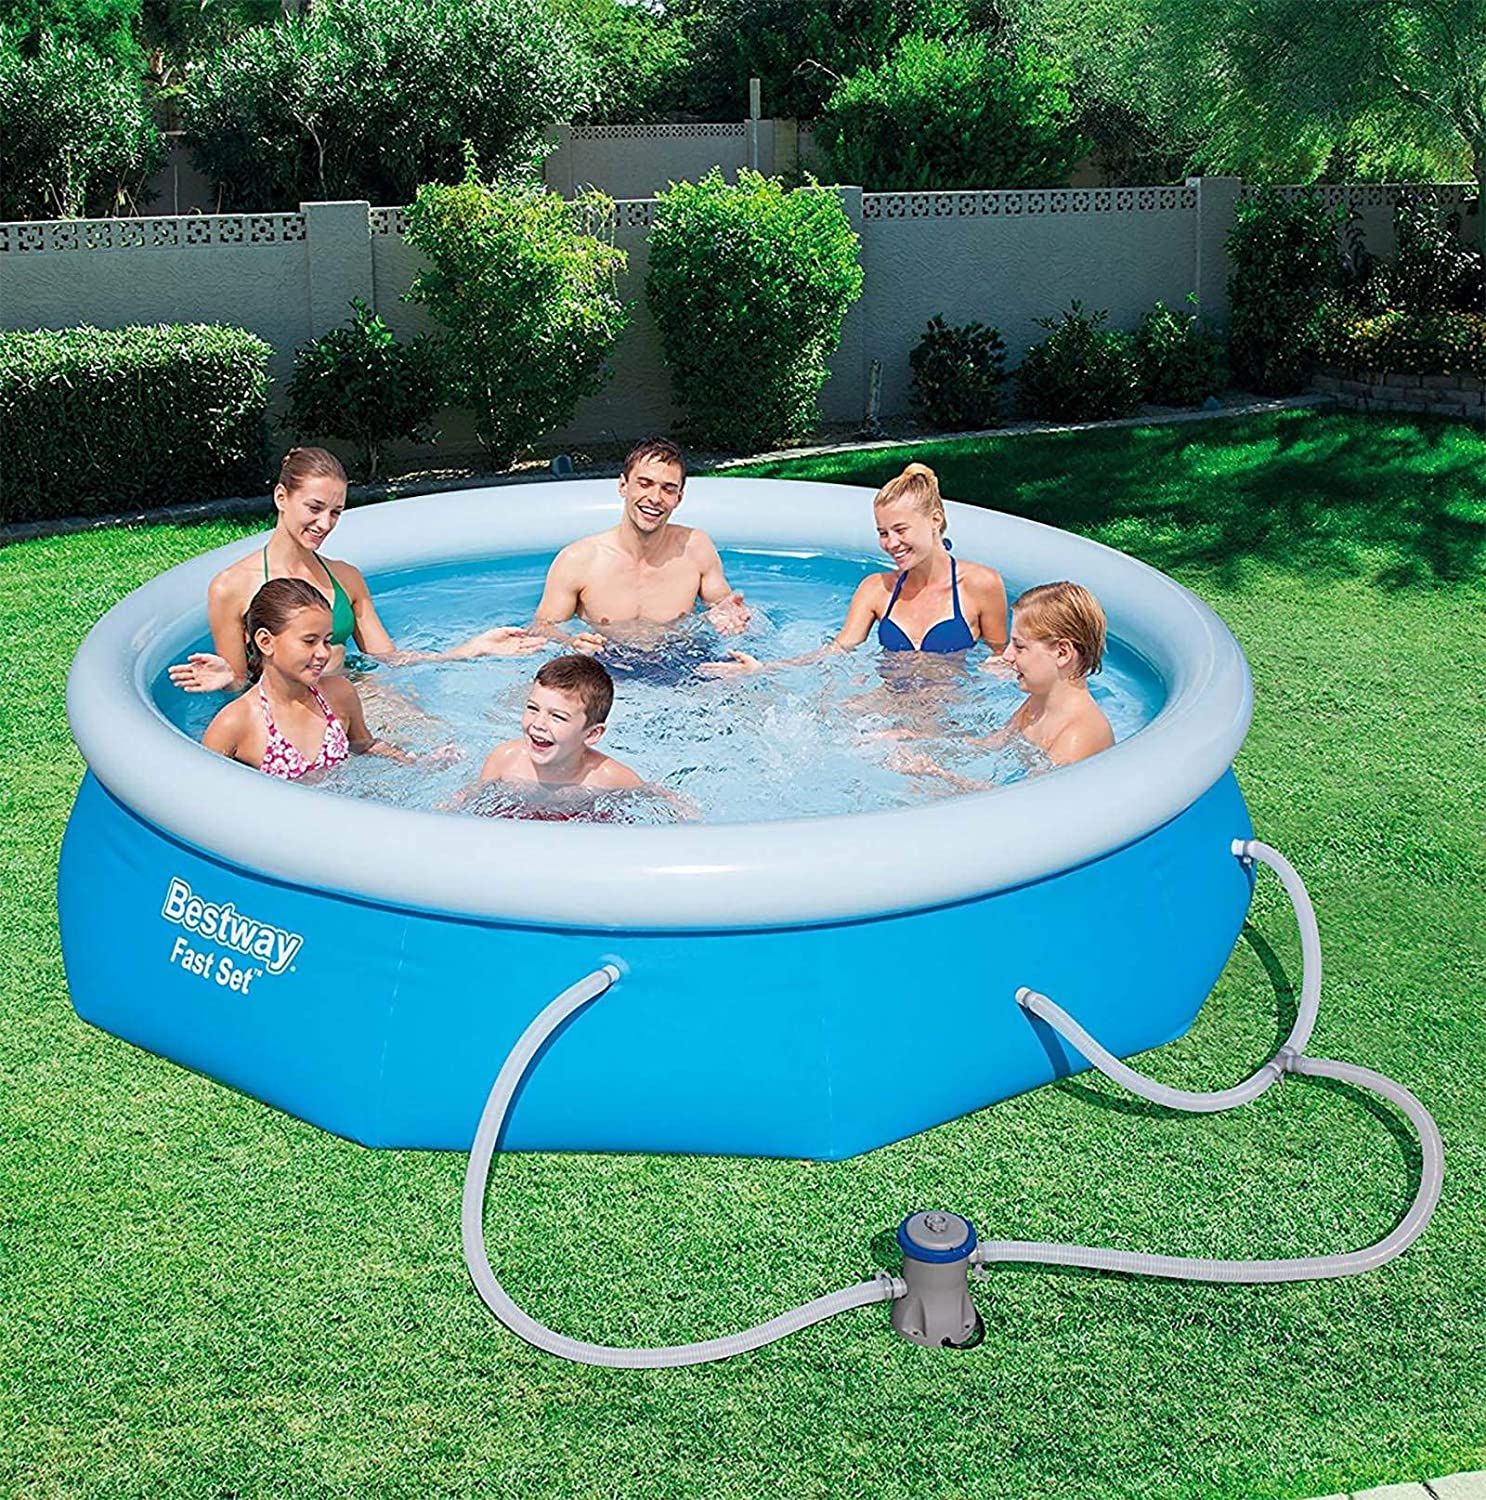 9 Best Inflatable Pools 2022 - Top Pools for Adults and Kids